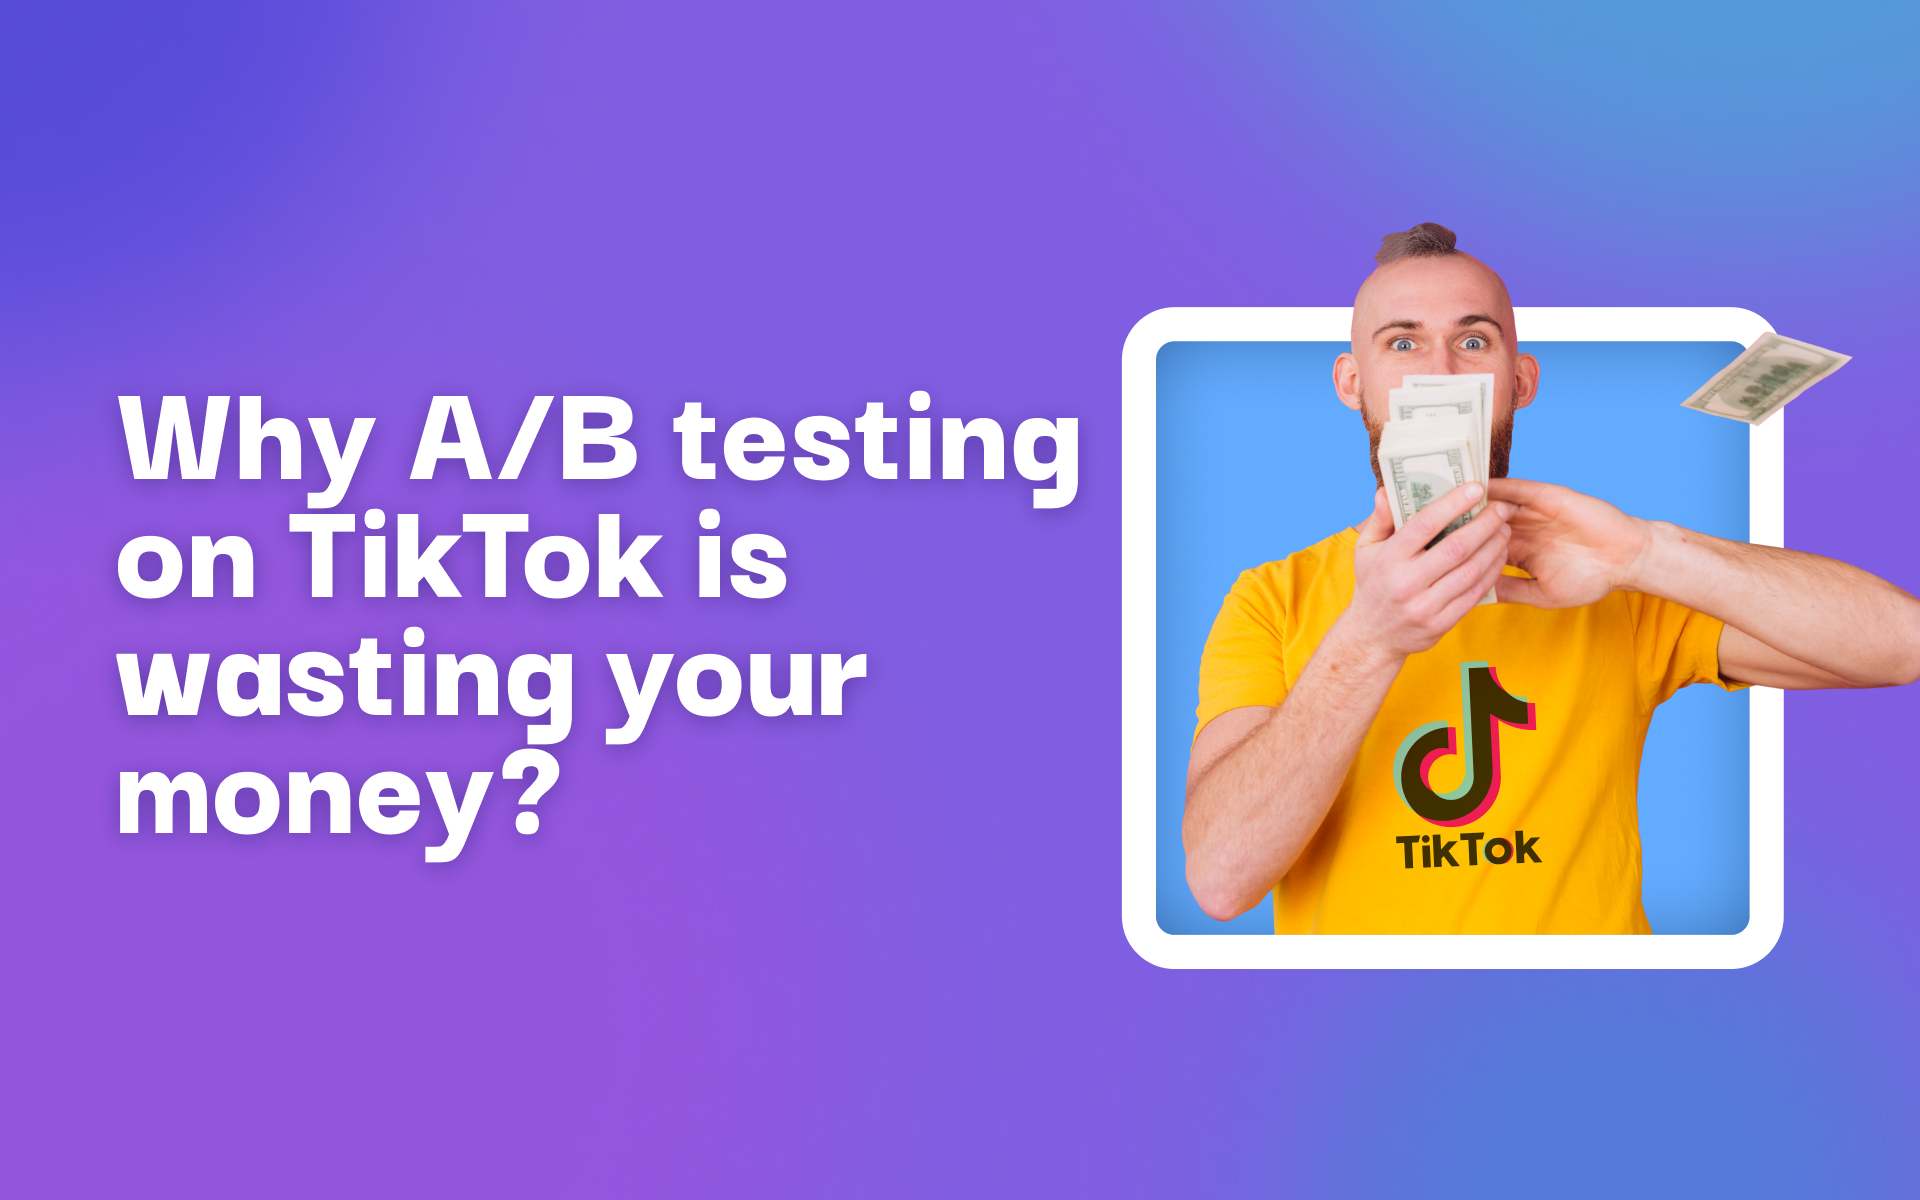 Why A/B testing on TikTok is wasting your money?